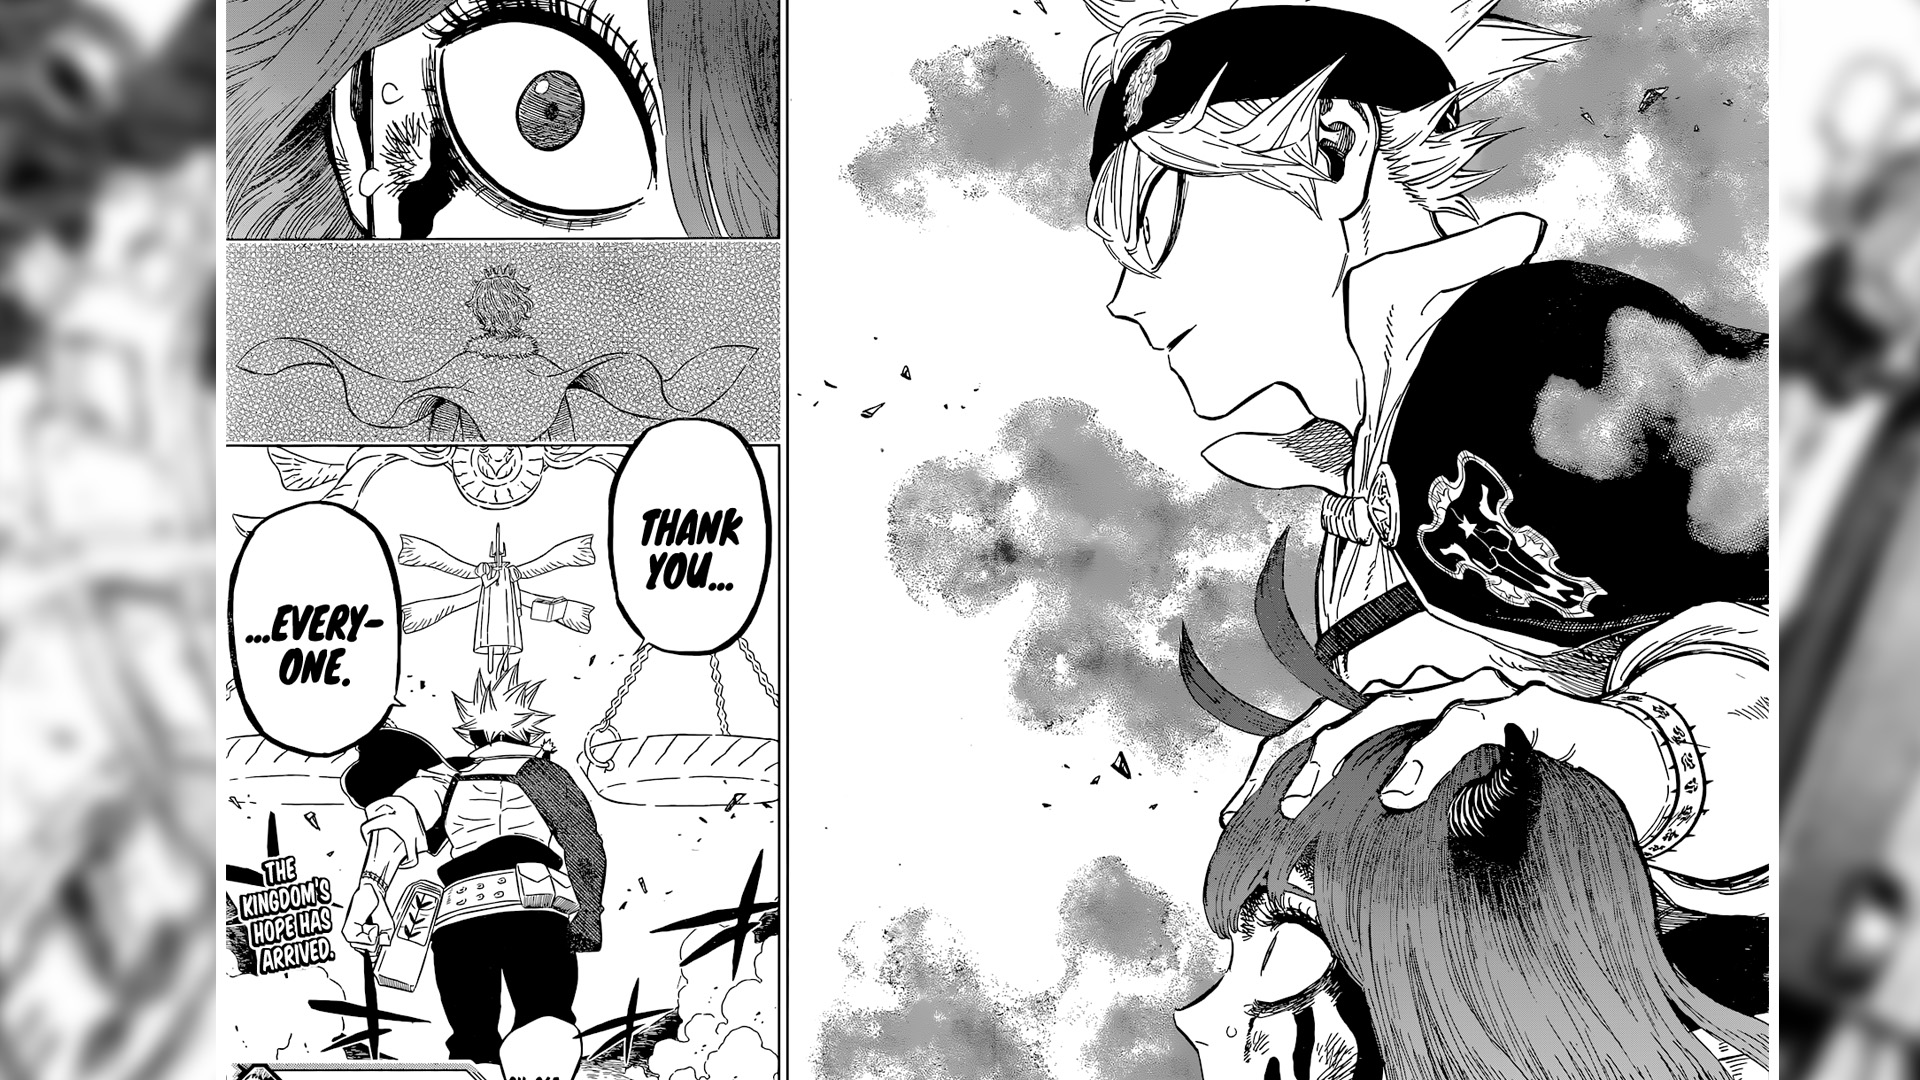 Black Clover Chapter 365 Is Out to Read!